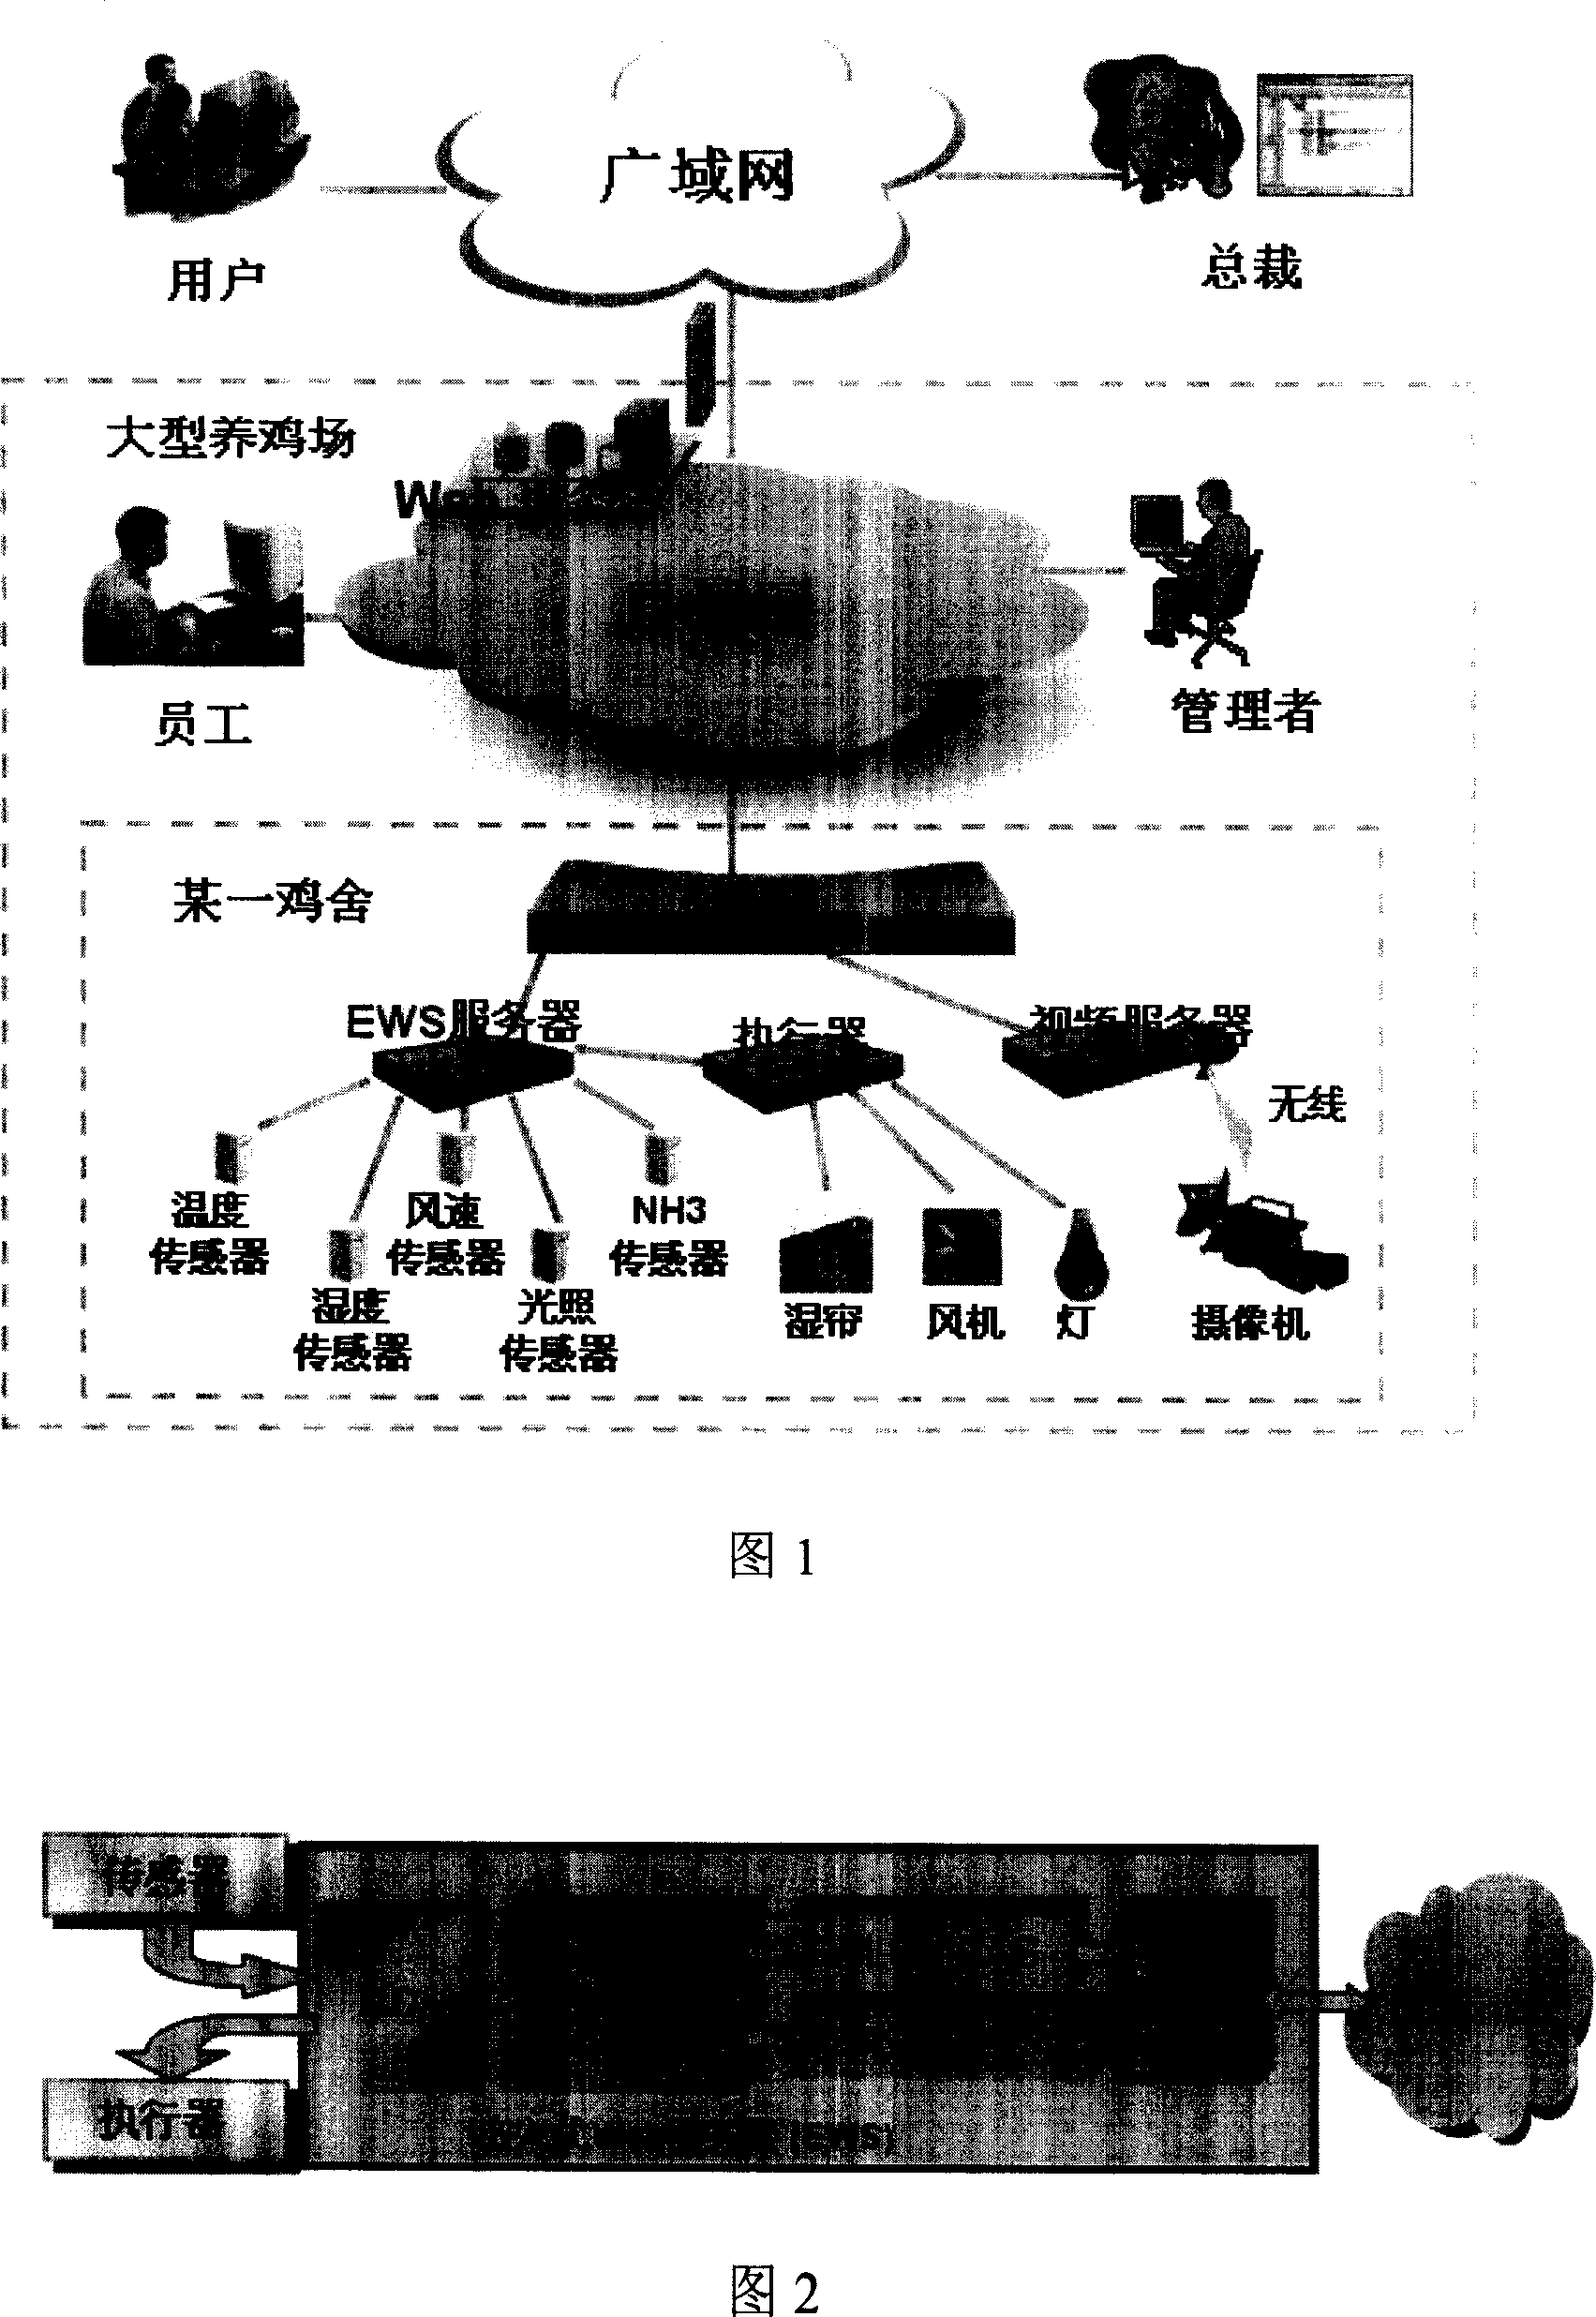 Embedded collecting and controlling system for colligate information of henhouse circumstance